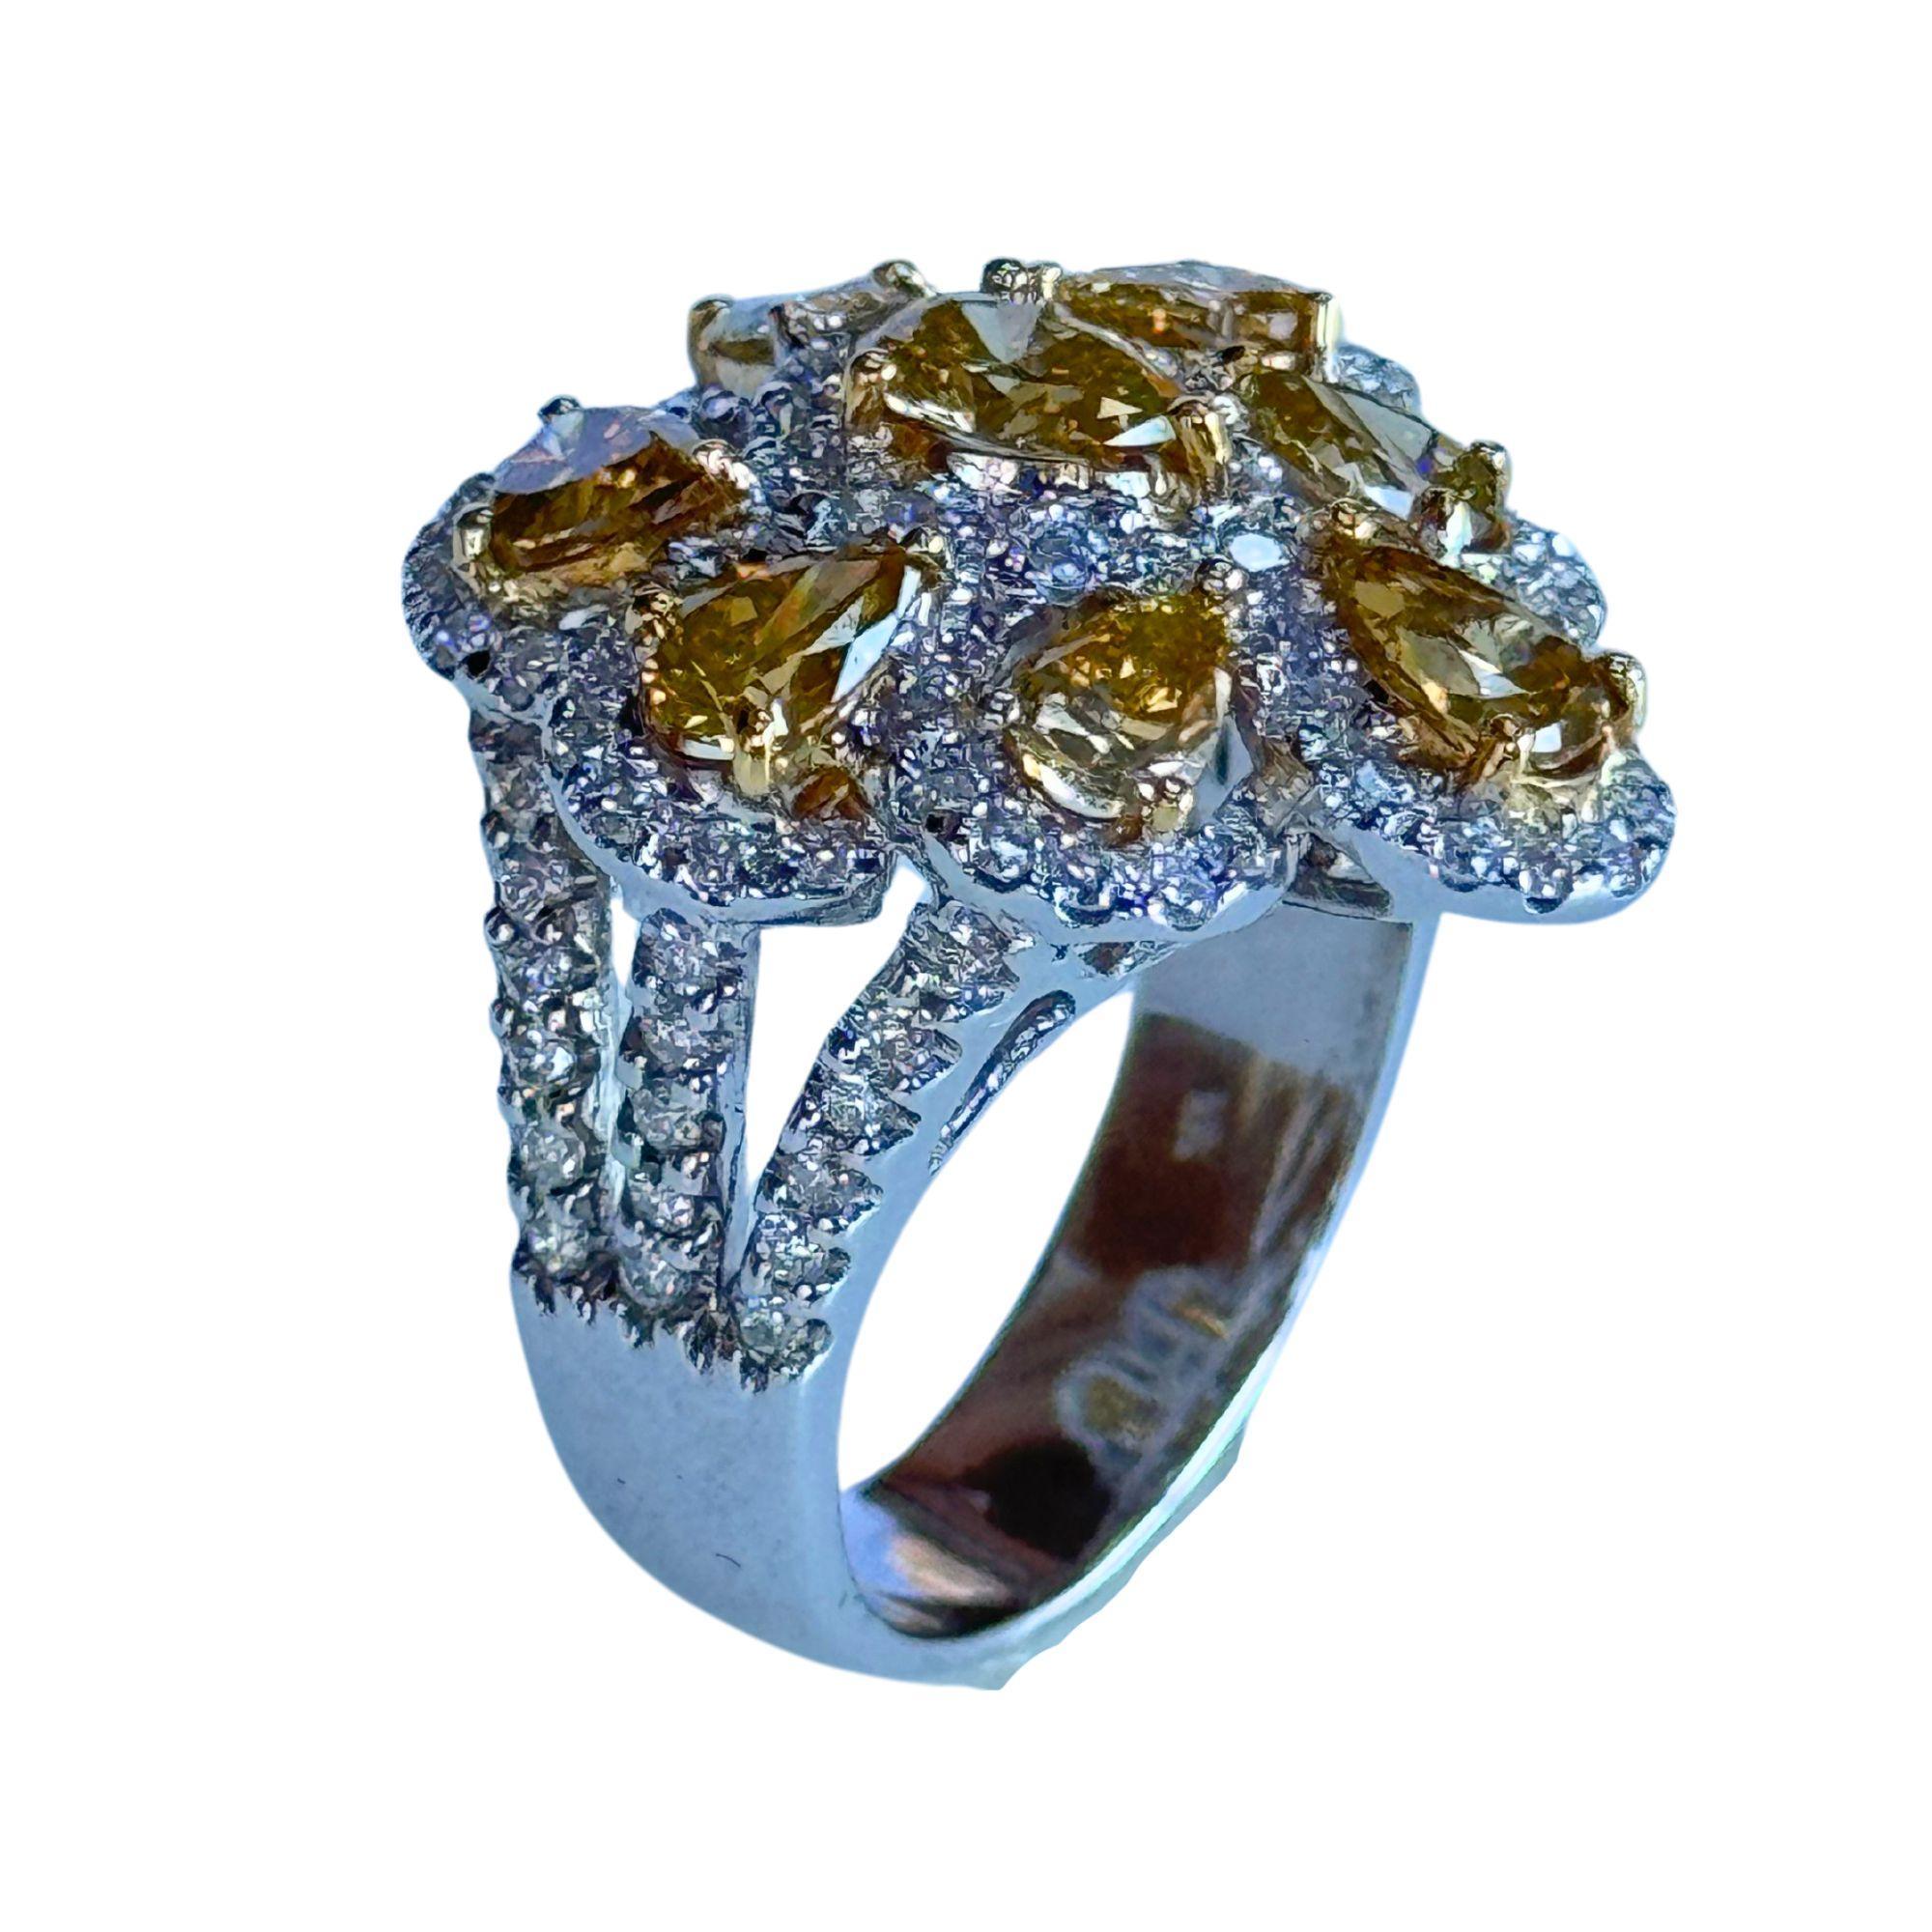 Look at this 18k White and Yellow Diamond Ring. Weighing 10.70 grams and sized at 6.75, this ring packs a punch of modern elegance. The yellow diamonds weigh a total of 2.34 carats paired with white diamonds weighing 1.14 carats. Size up your style